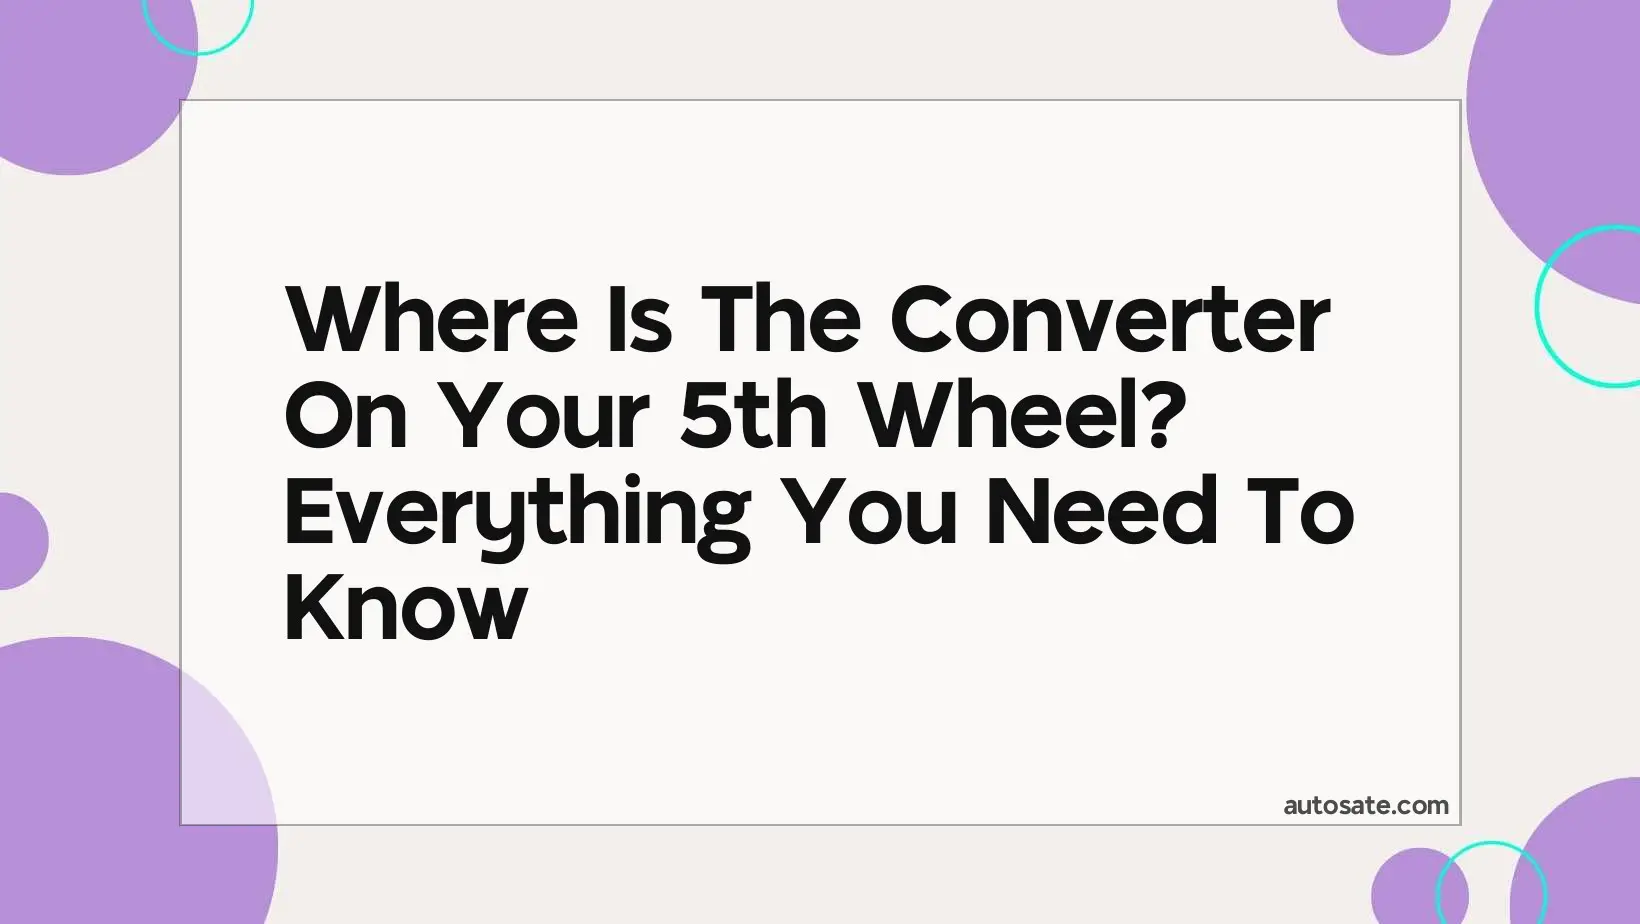 Where Is The Converter On Your 5Th Wheel? Everything You Need To Know